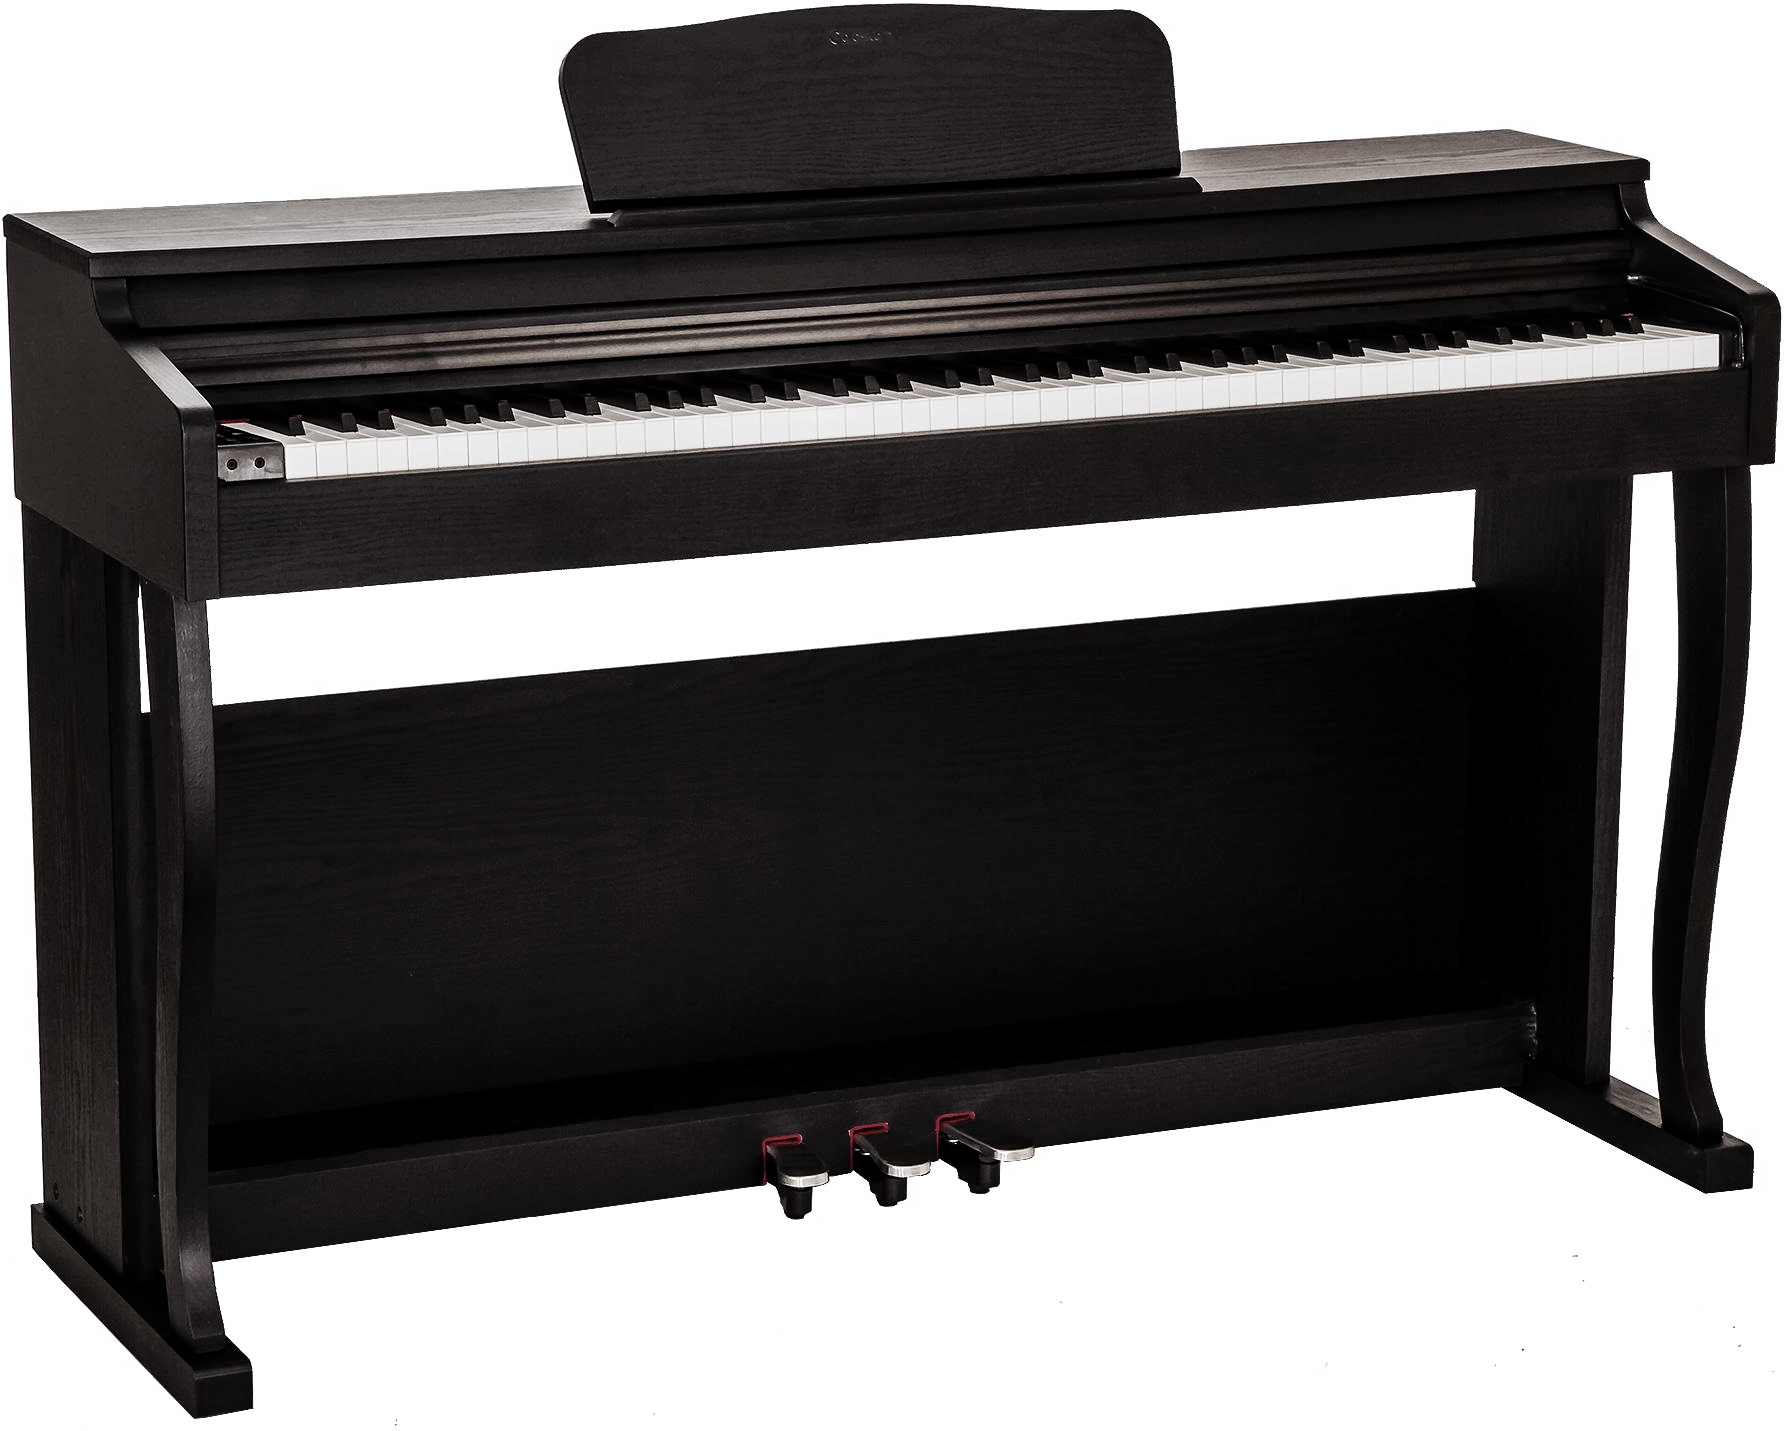 Goldstein Glp-12 - Noir - Digital piano with stand - Main picture